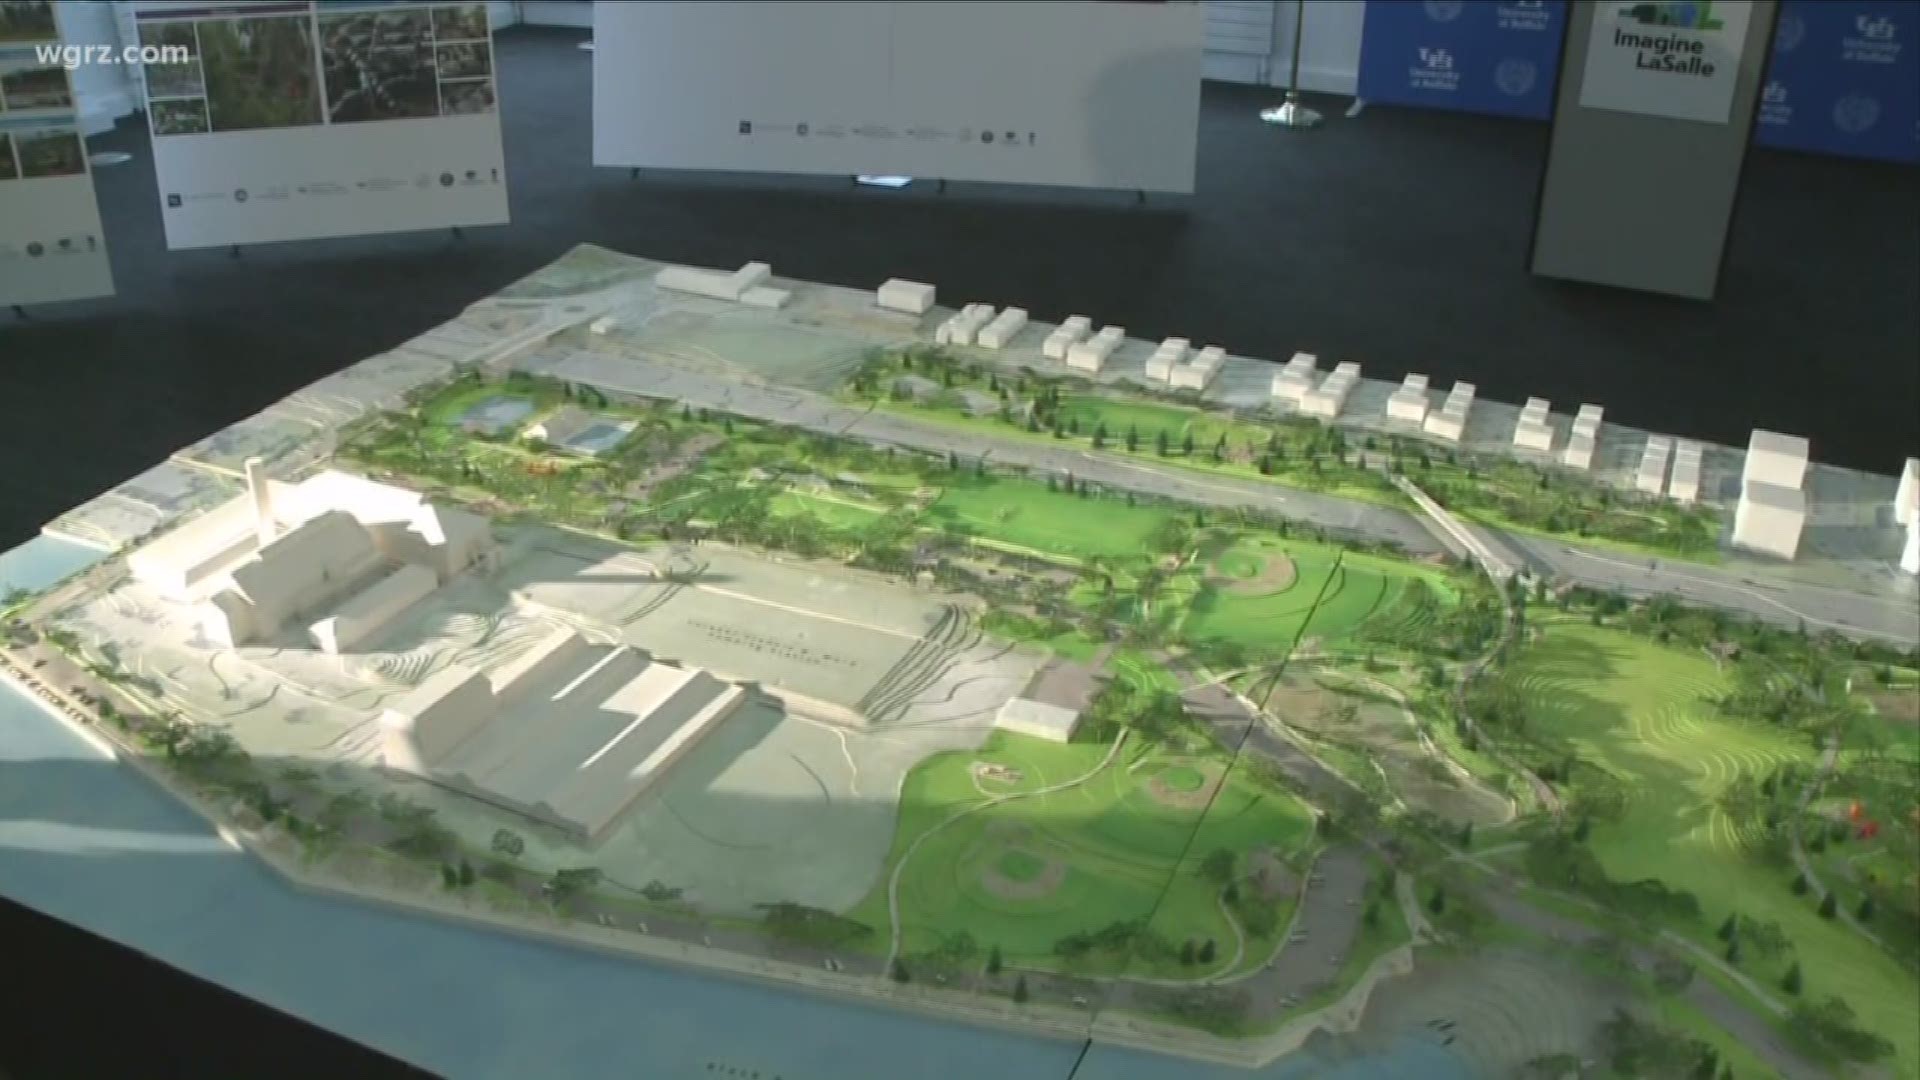 THE 100-MILLION DOLLAR PROJECT will transform and RE-IMAGINE LASALLE PARK... INTO A ONE OF A KIND SPOT.